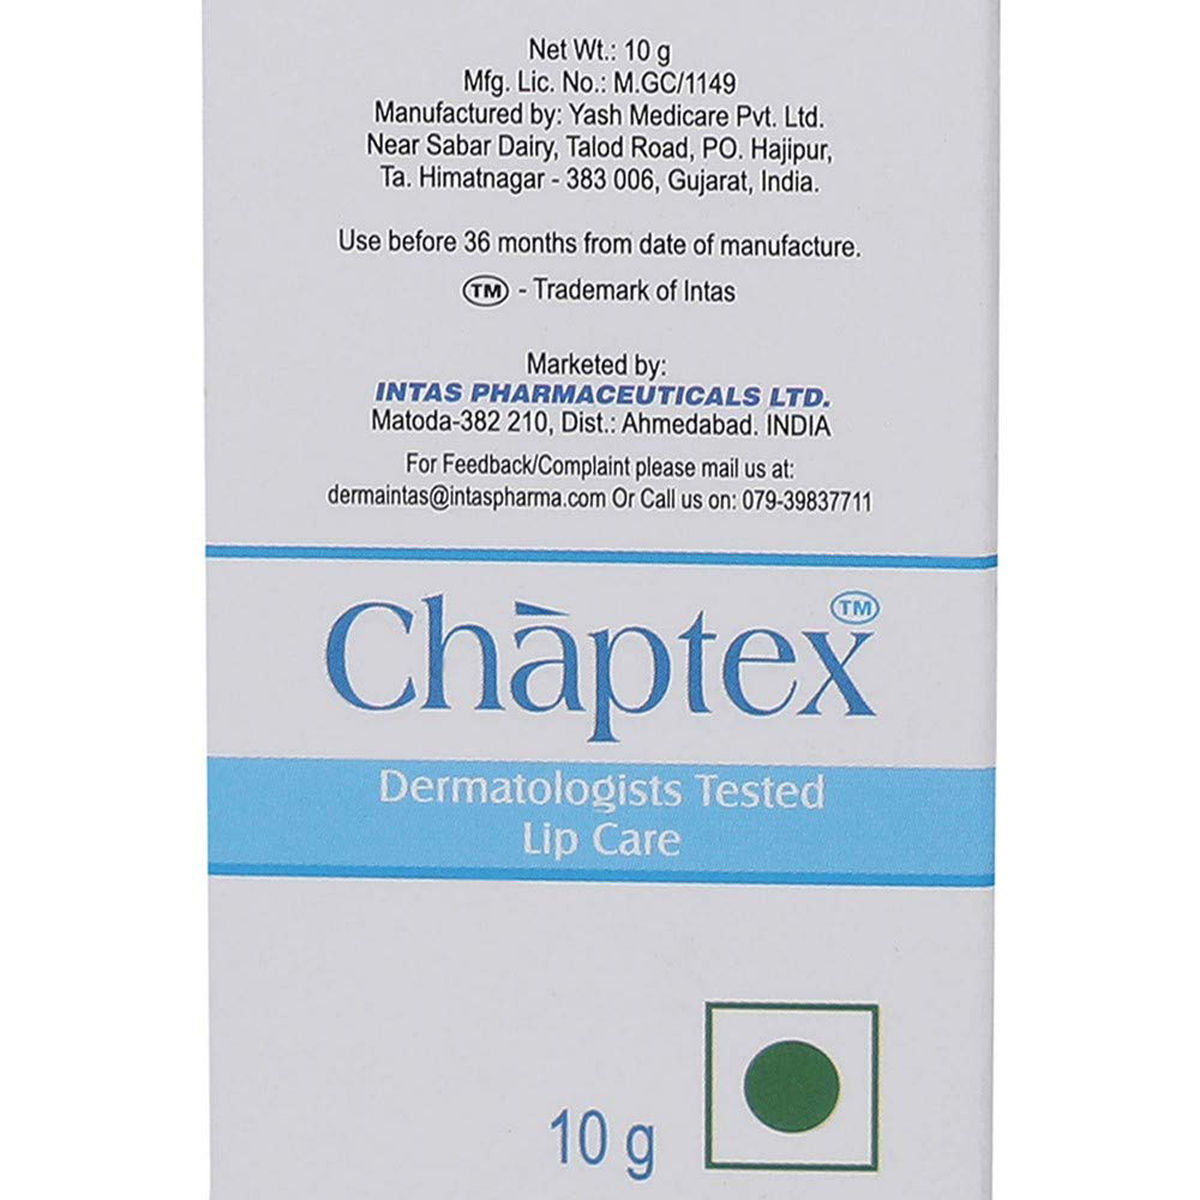 Chaptex Dermotologist Tested Lip Care SPF 15, 10 gm, Pack of 1 